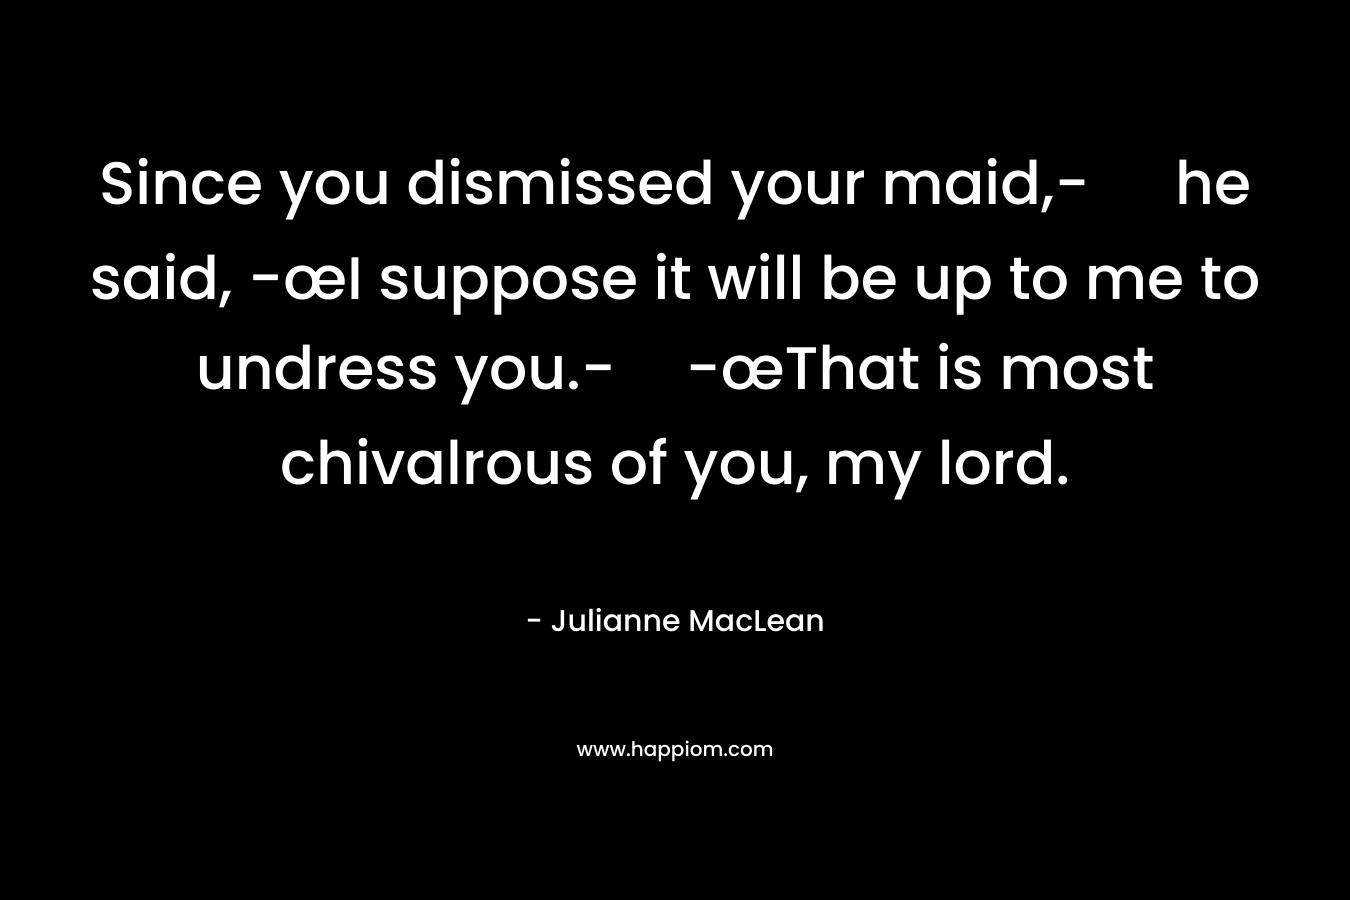 Since you dismissed your maid,- he said, -œI suppose it will be up to me to undress you.--œThat is most chivalrous of you, my lord. – Julianne MacLean